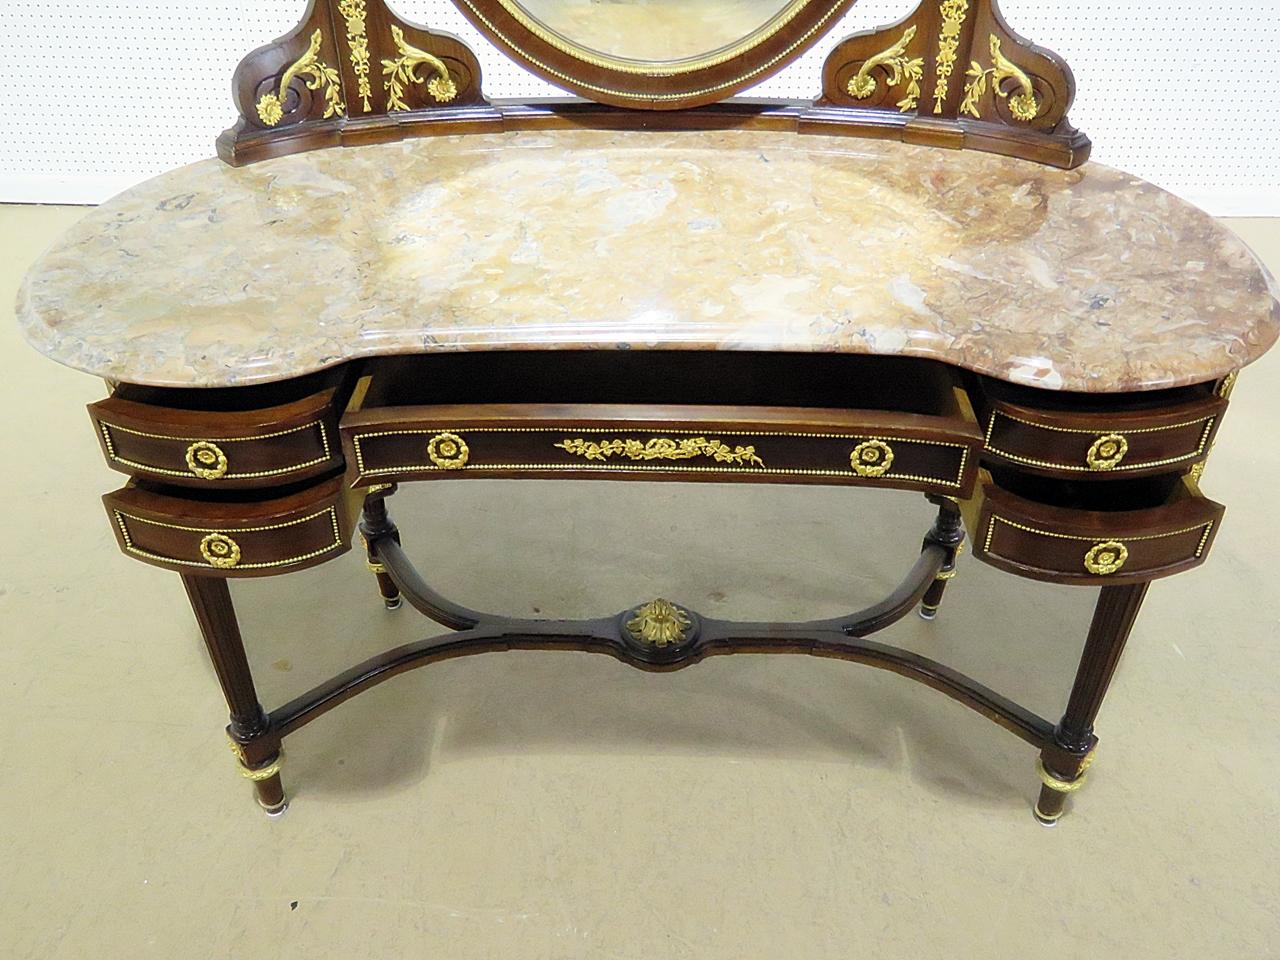 This is an outstanding Francois Linke style ladies vanity with a gorgeous slab of shaped Breche marble on top and adorned with crisp, Linke quality bronze ormolu and bronze acorn mounts. The mahogany case is designed in a kidney shape and is